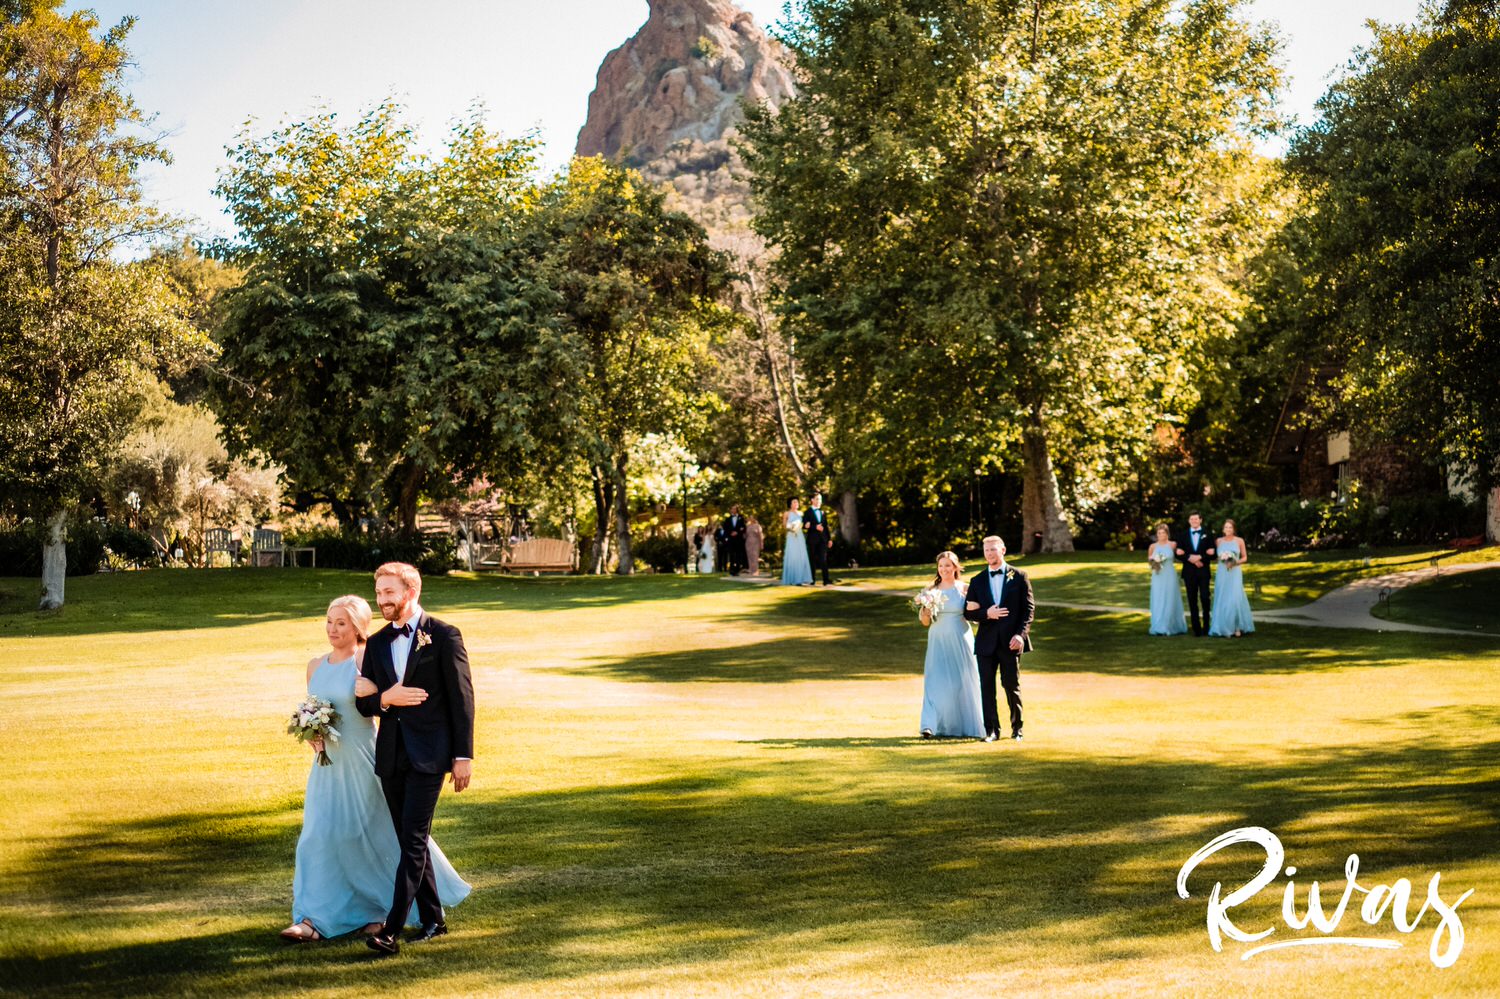 Saddlerock Ranch Summer Wedding | Destination Wedding Photographers | Rivas | A wide photo of a bridal party dressed in light blue dresses and black tuxedos walking arm in arm down the lawn to the wedding ceremony cite. 